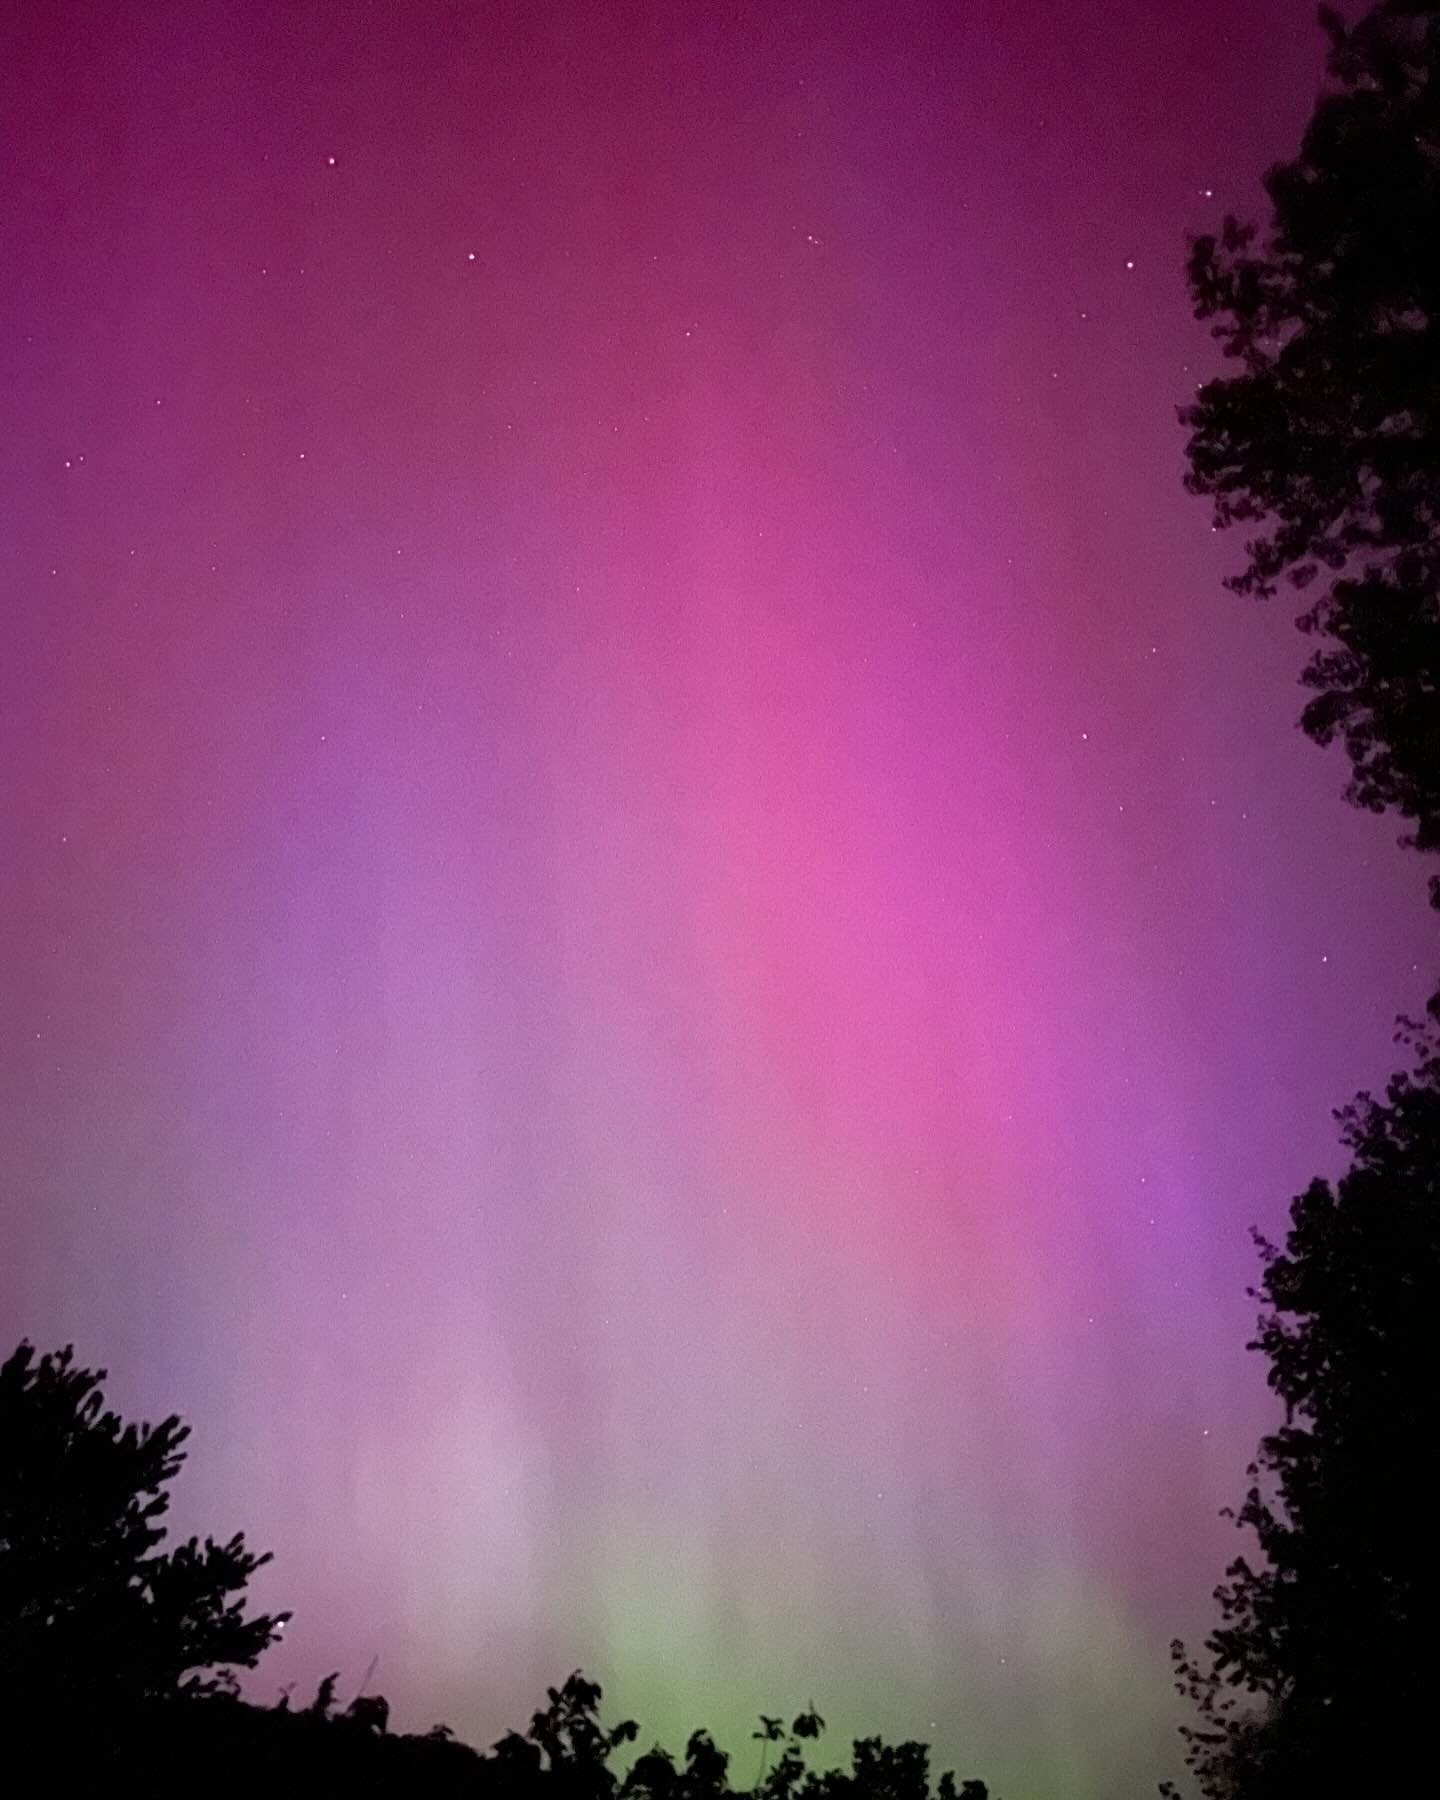 Well, well, well&hellip; #auroraborealis #northwrnlights #connecticut